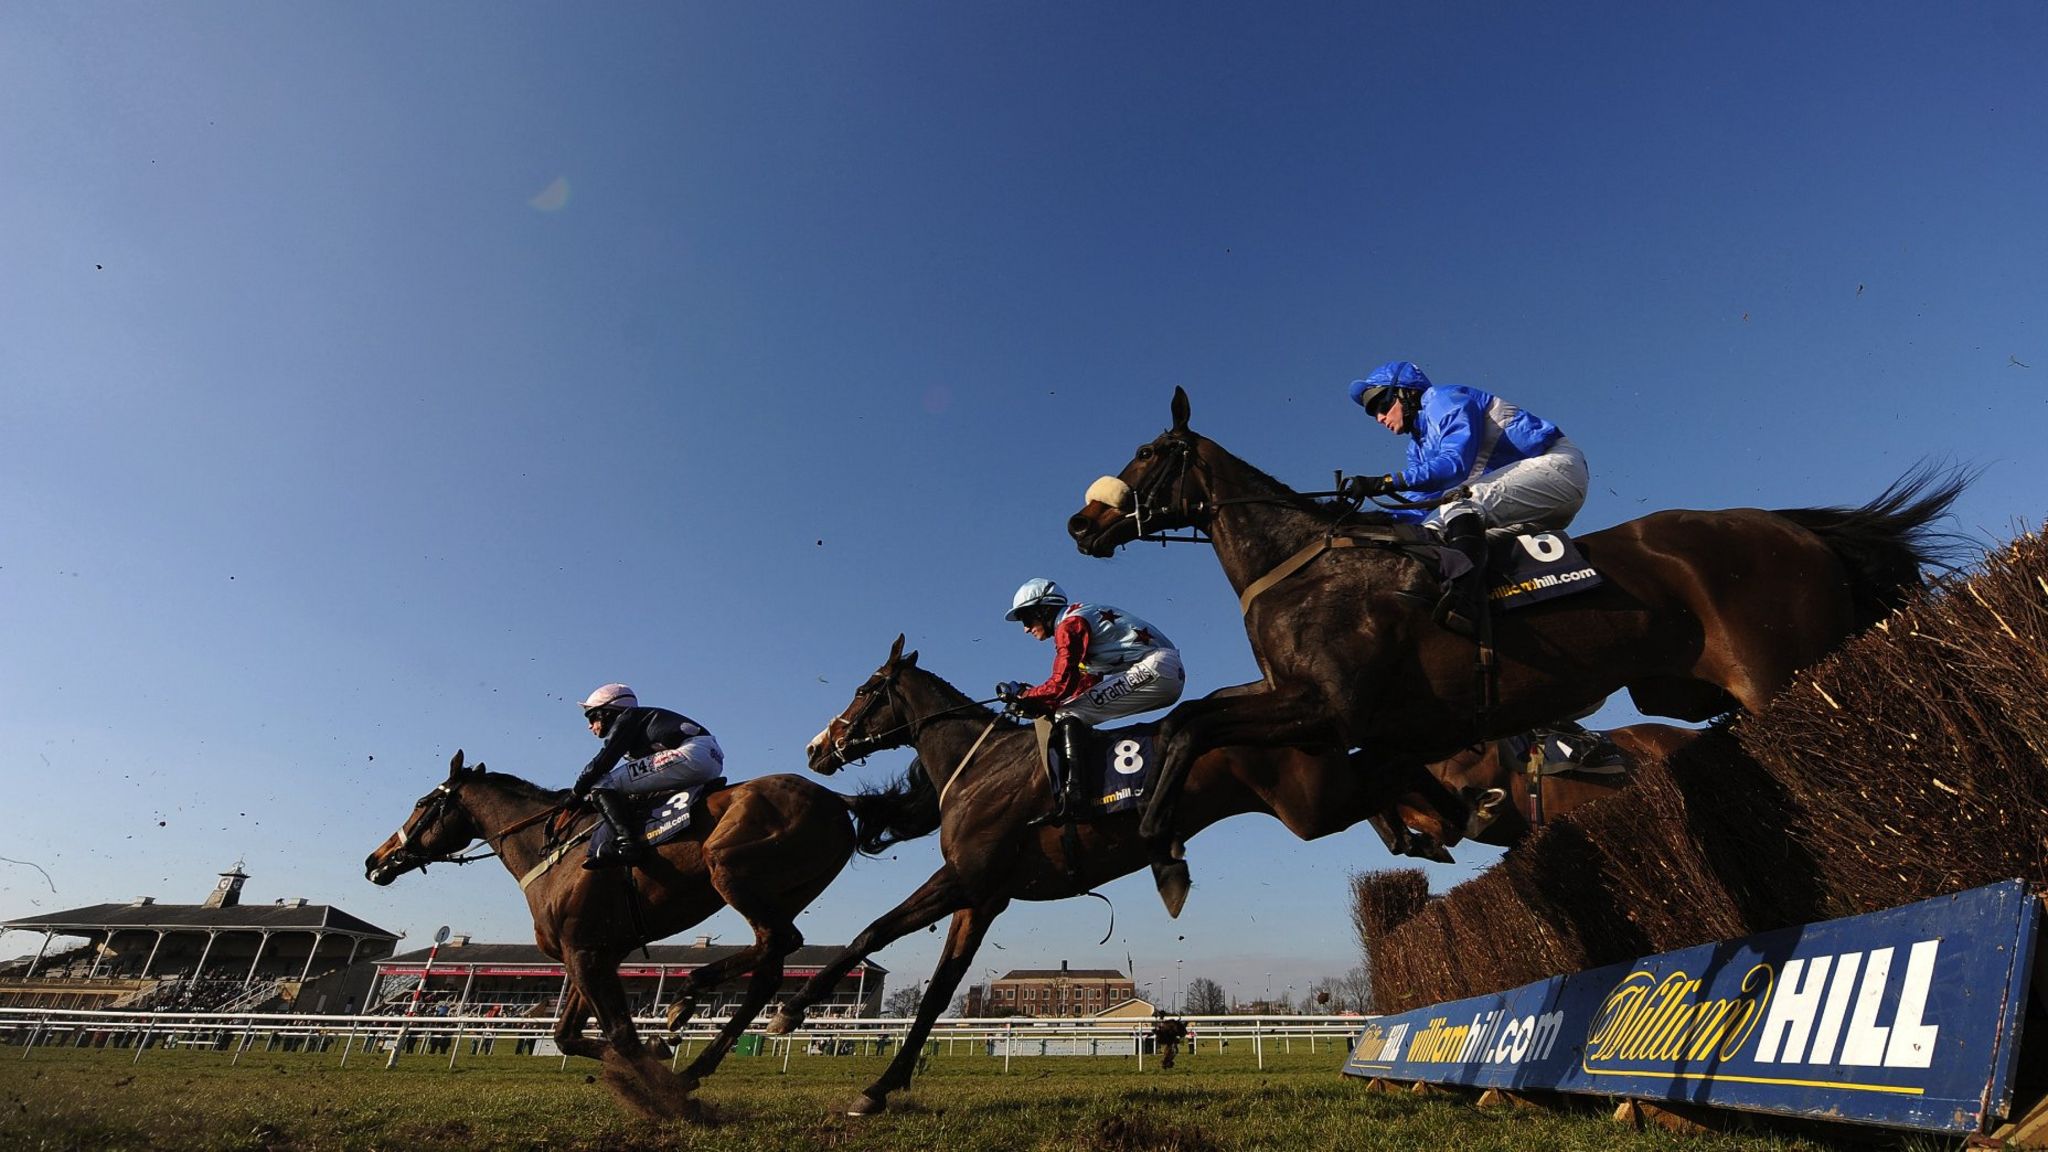 Horses clearing jump with William Hill logo beneath